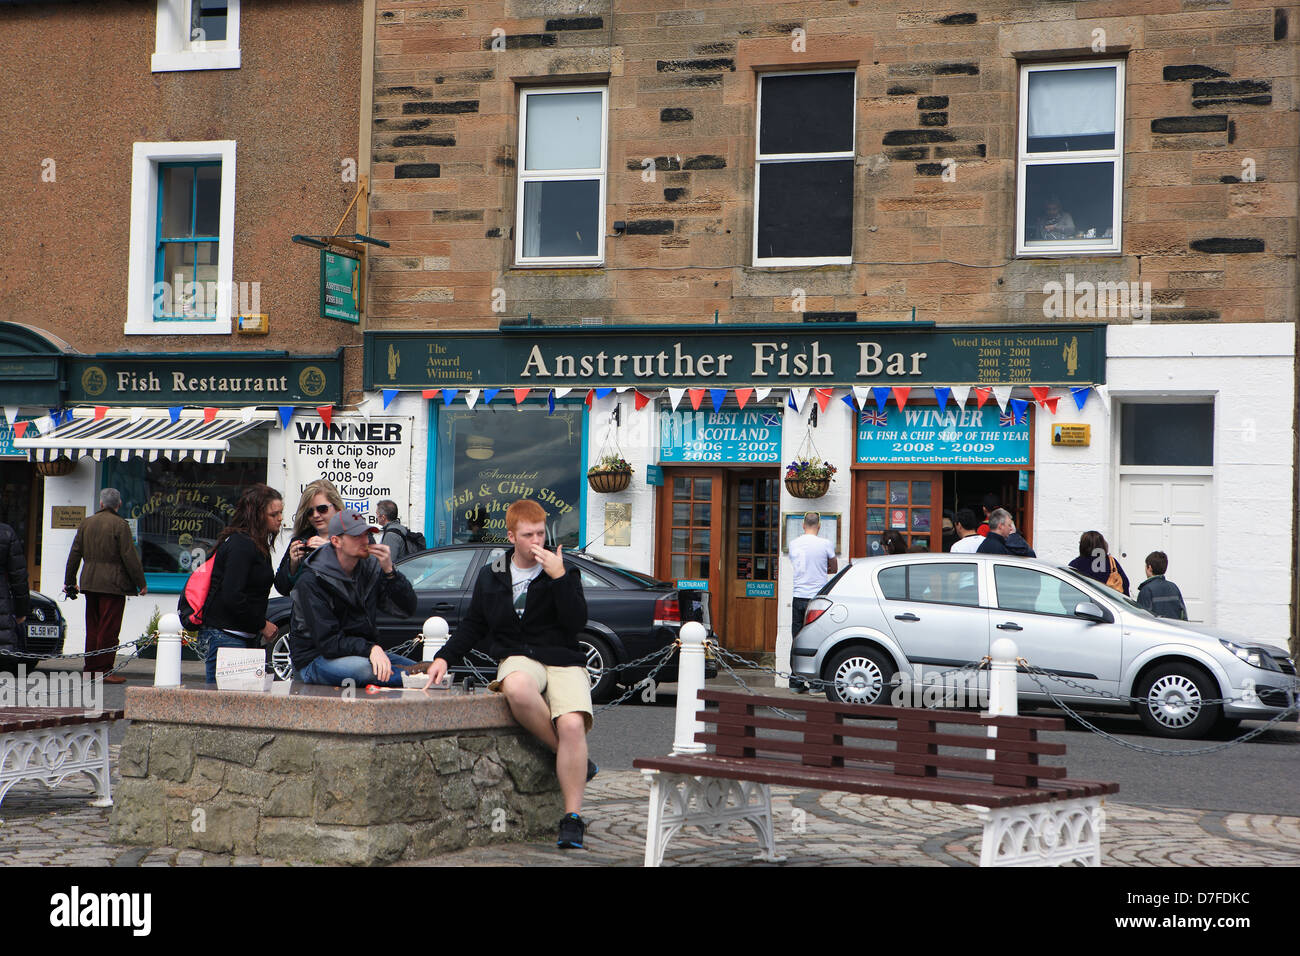 Group of young people outside eating fish and chips from the award winning Anstruther Fish Bar in Fife Scotland Stock Photo